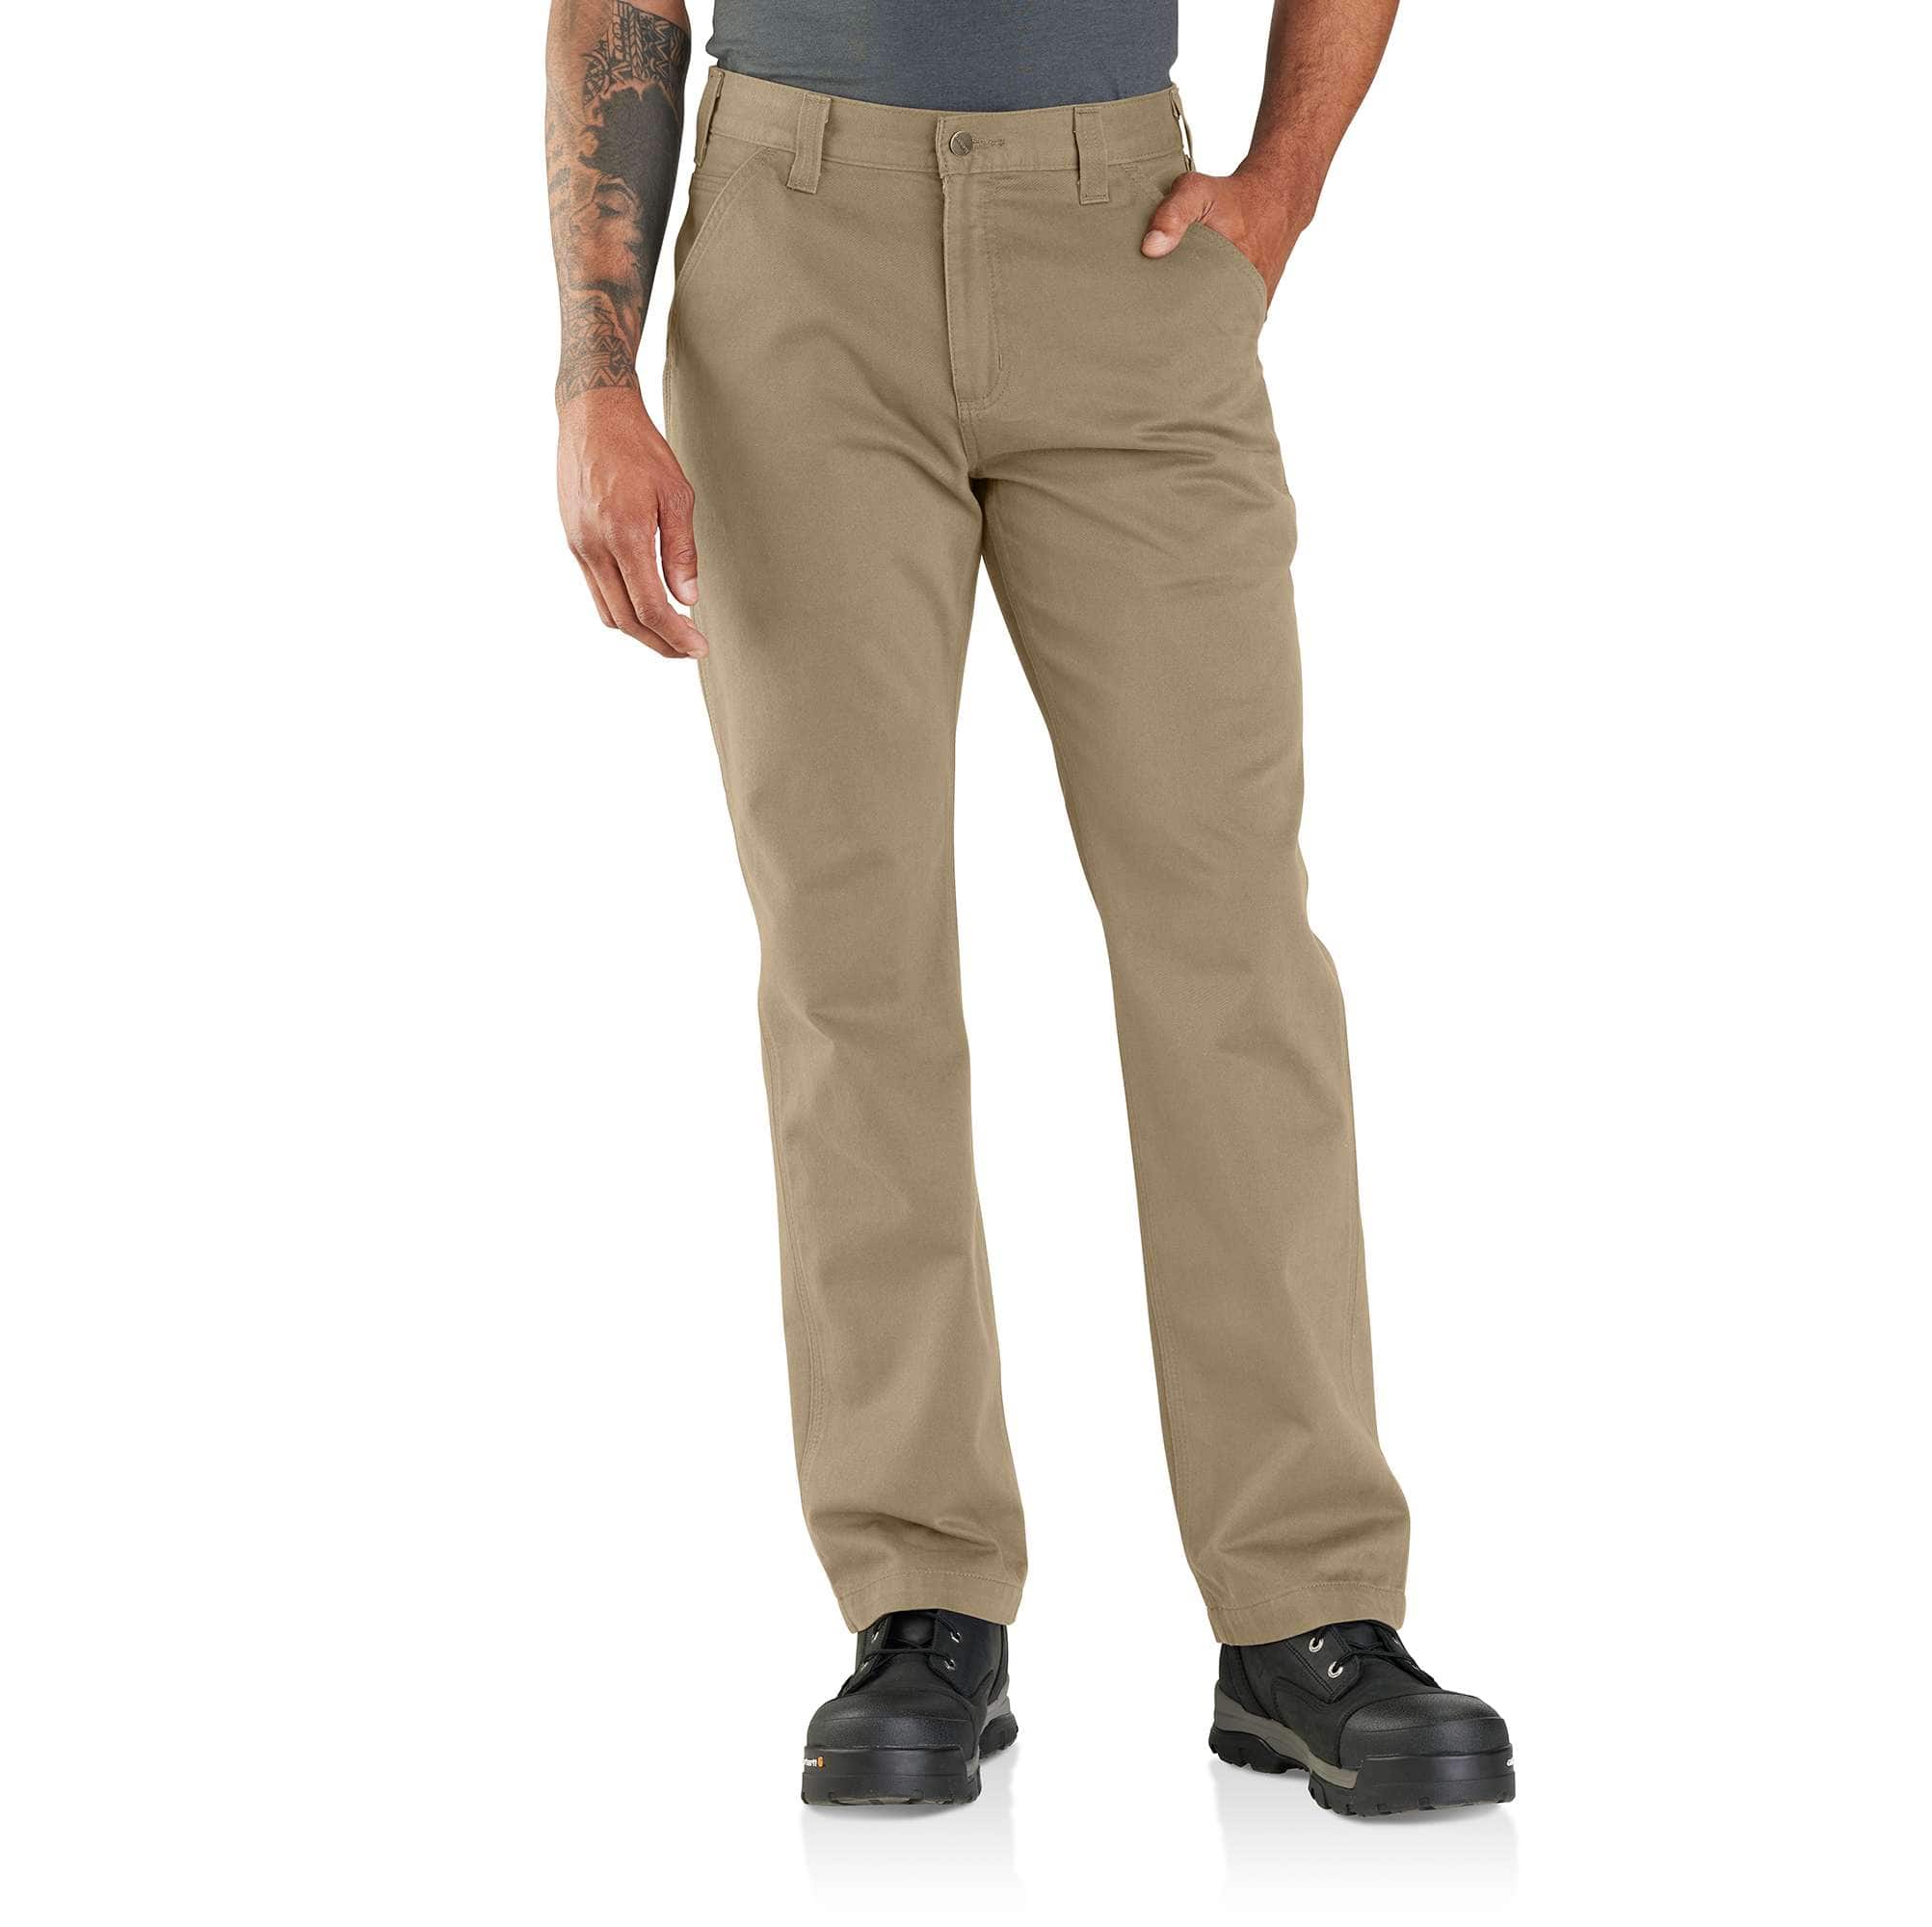 Men's Utility Work Pant - Relaxed Fit - Twill | L34 | Carhartt